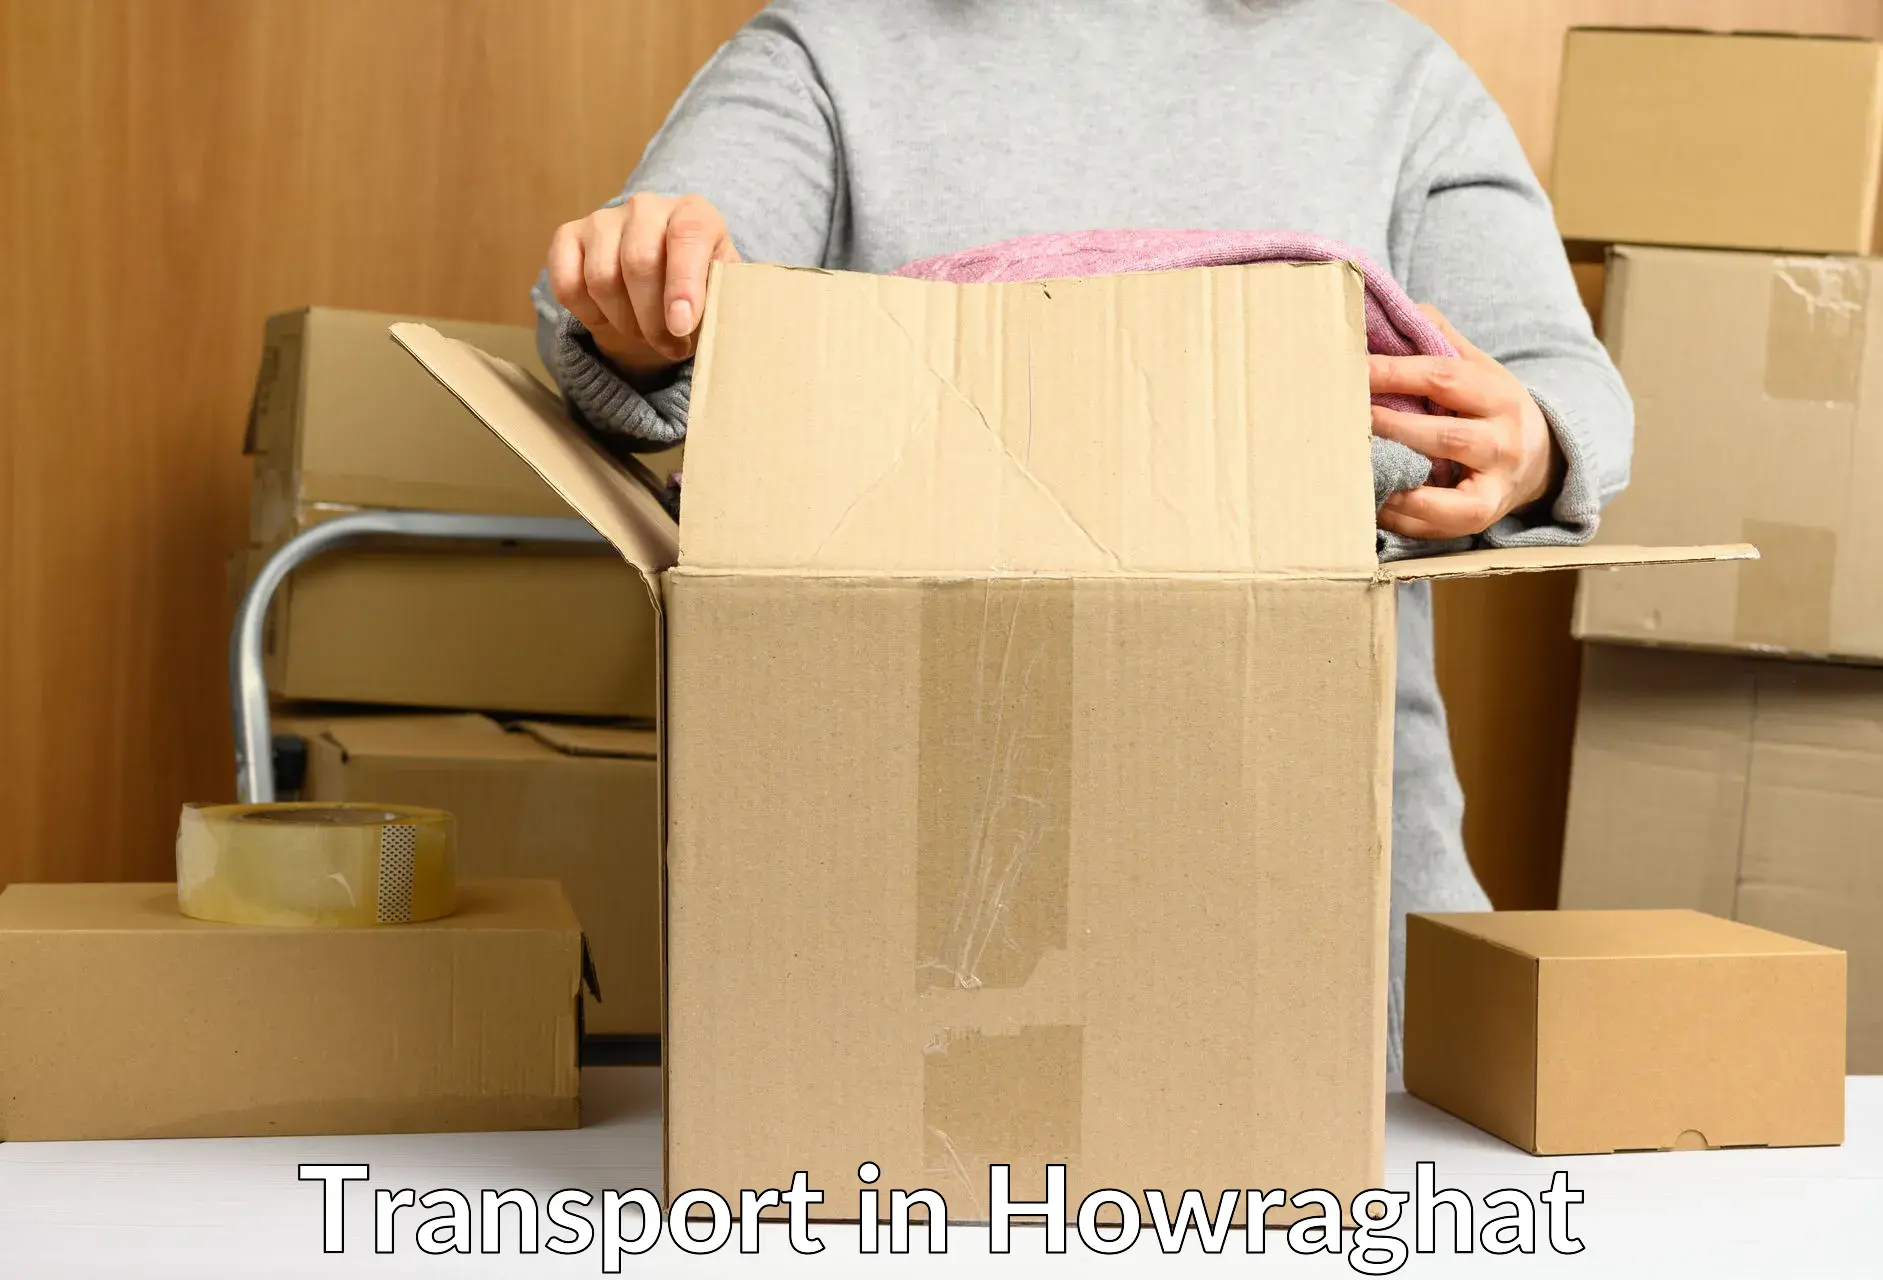 Luggage transport services in Howraghat